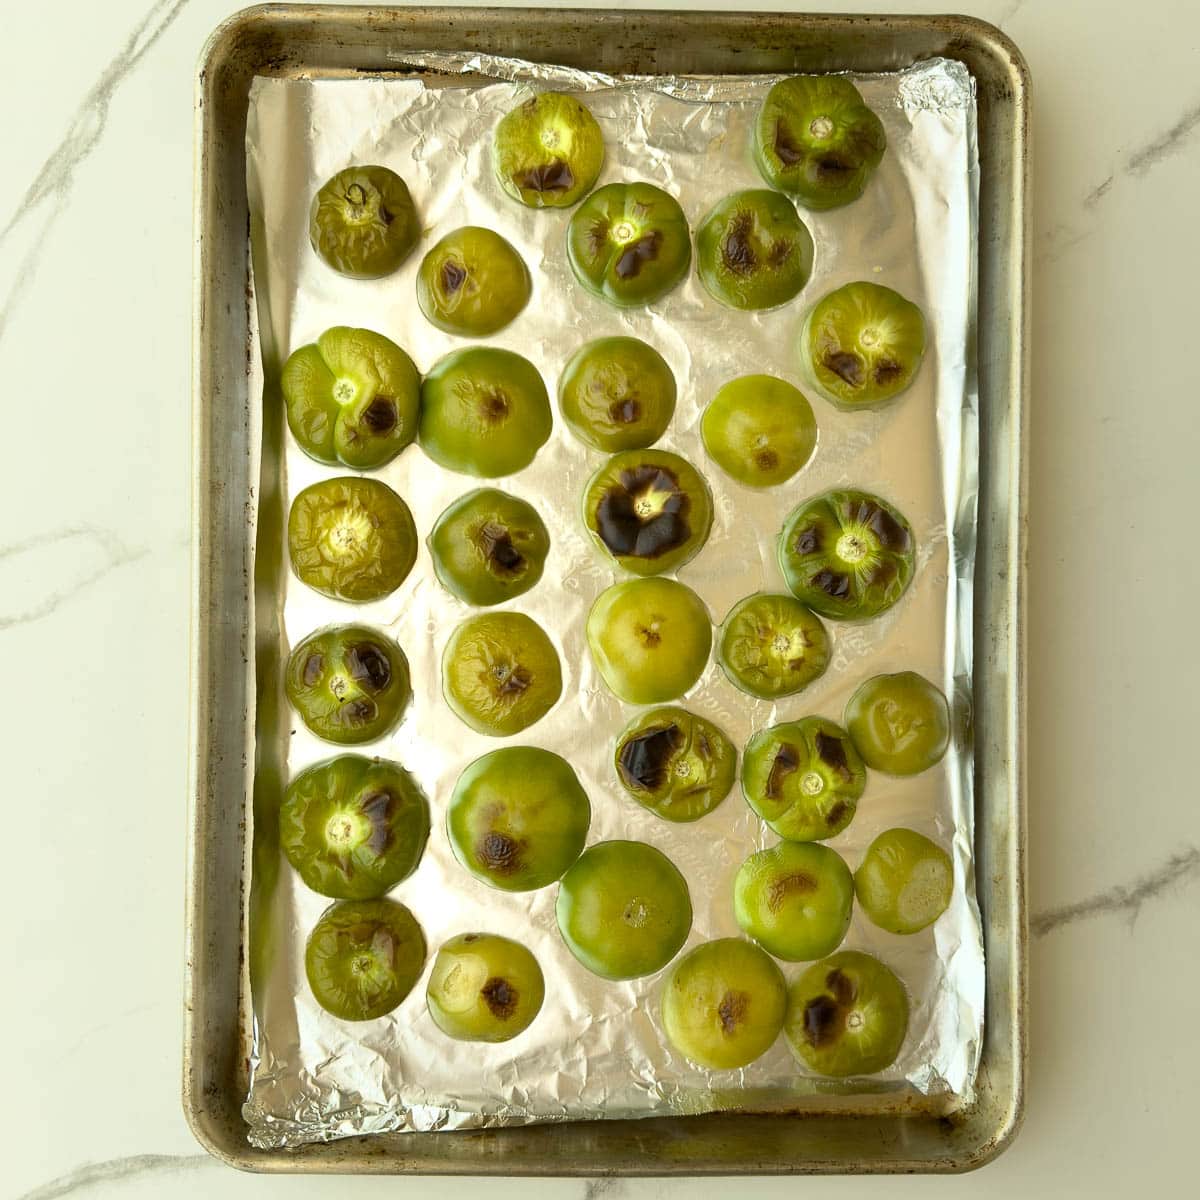 Green tomatillos after broiling with browned spots.